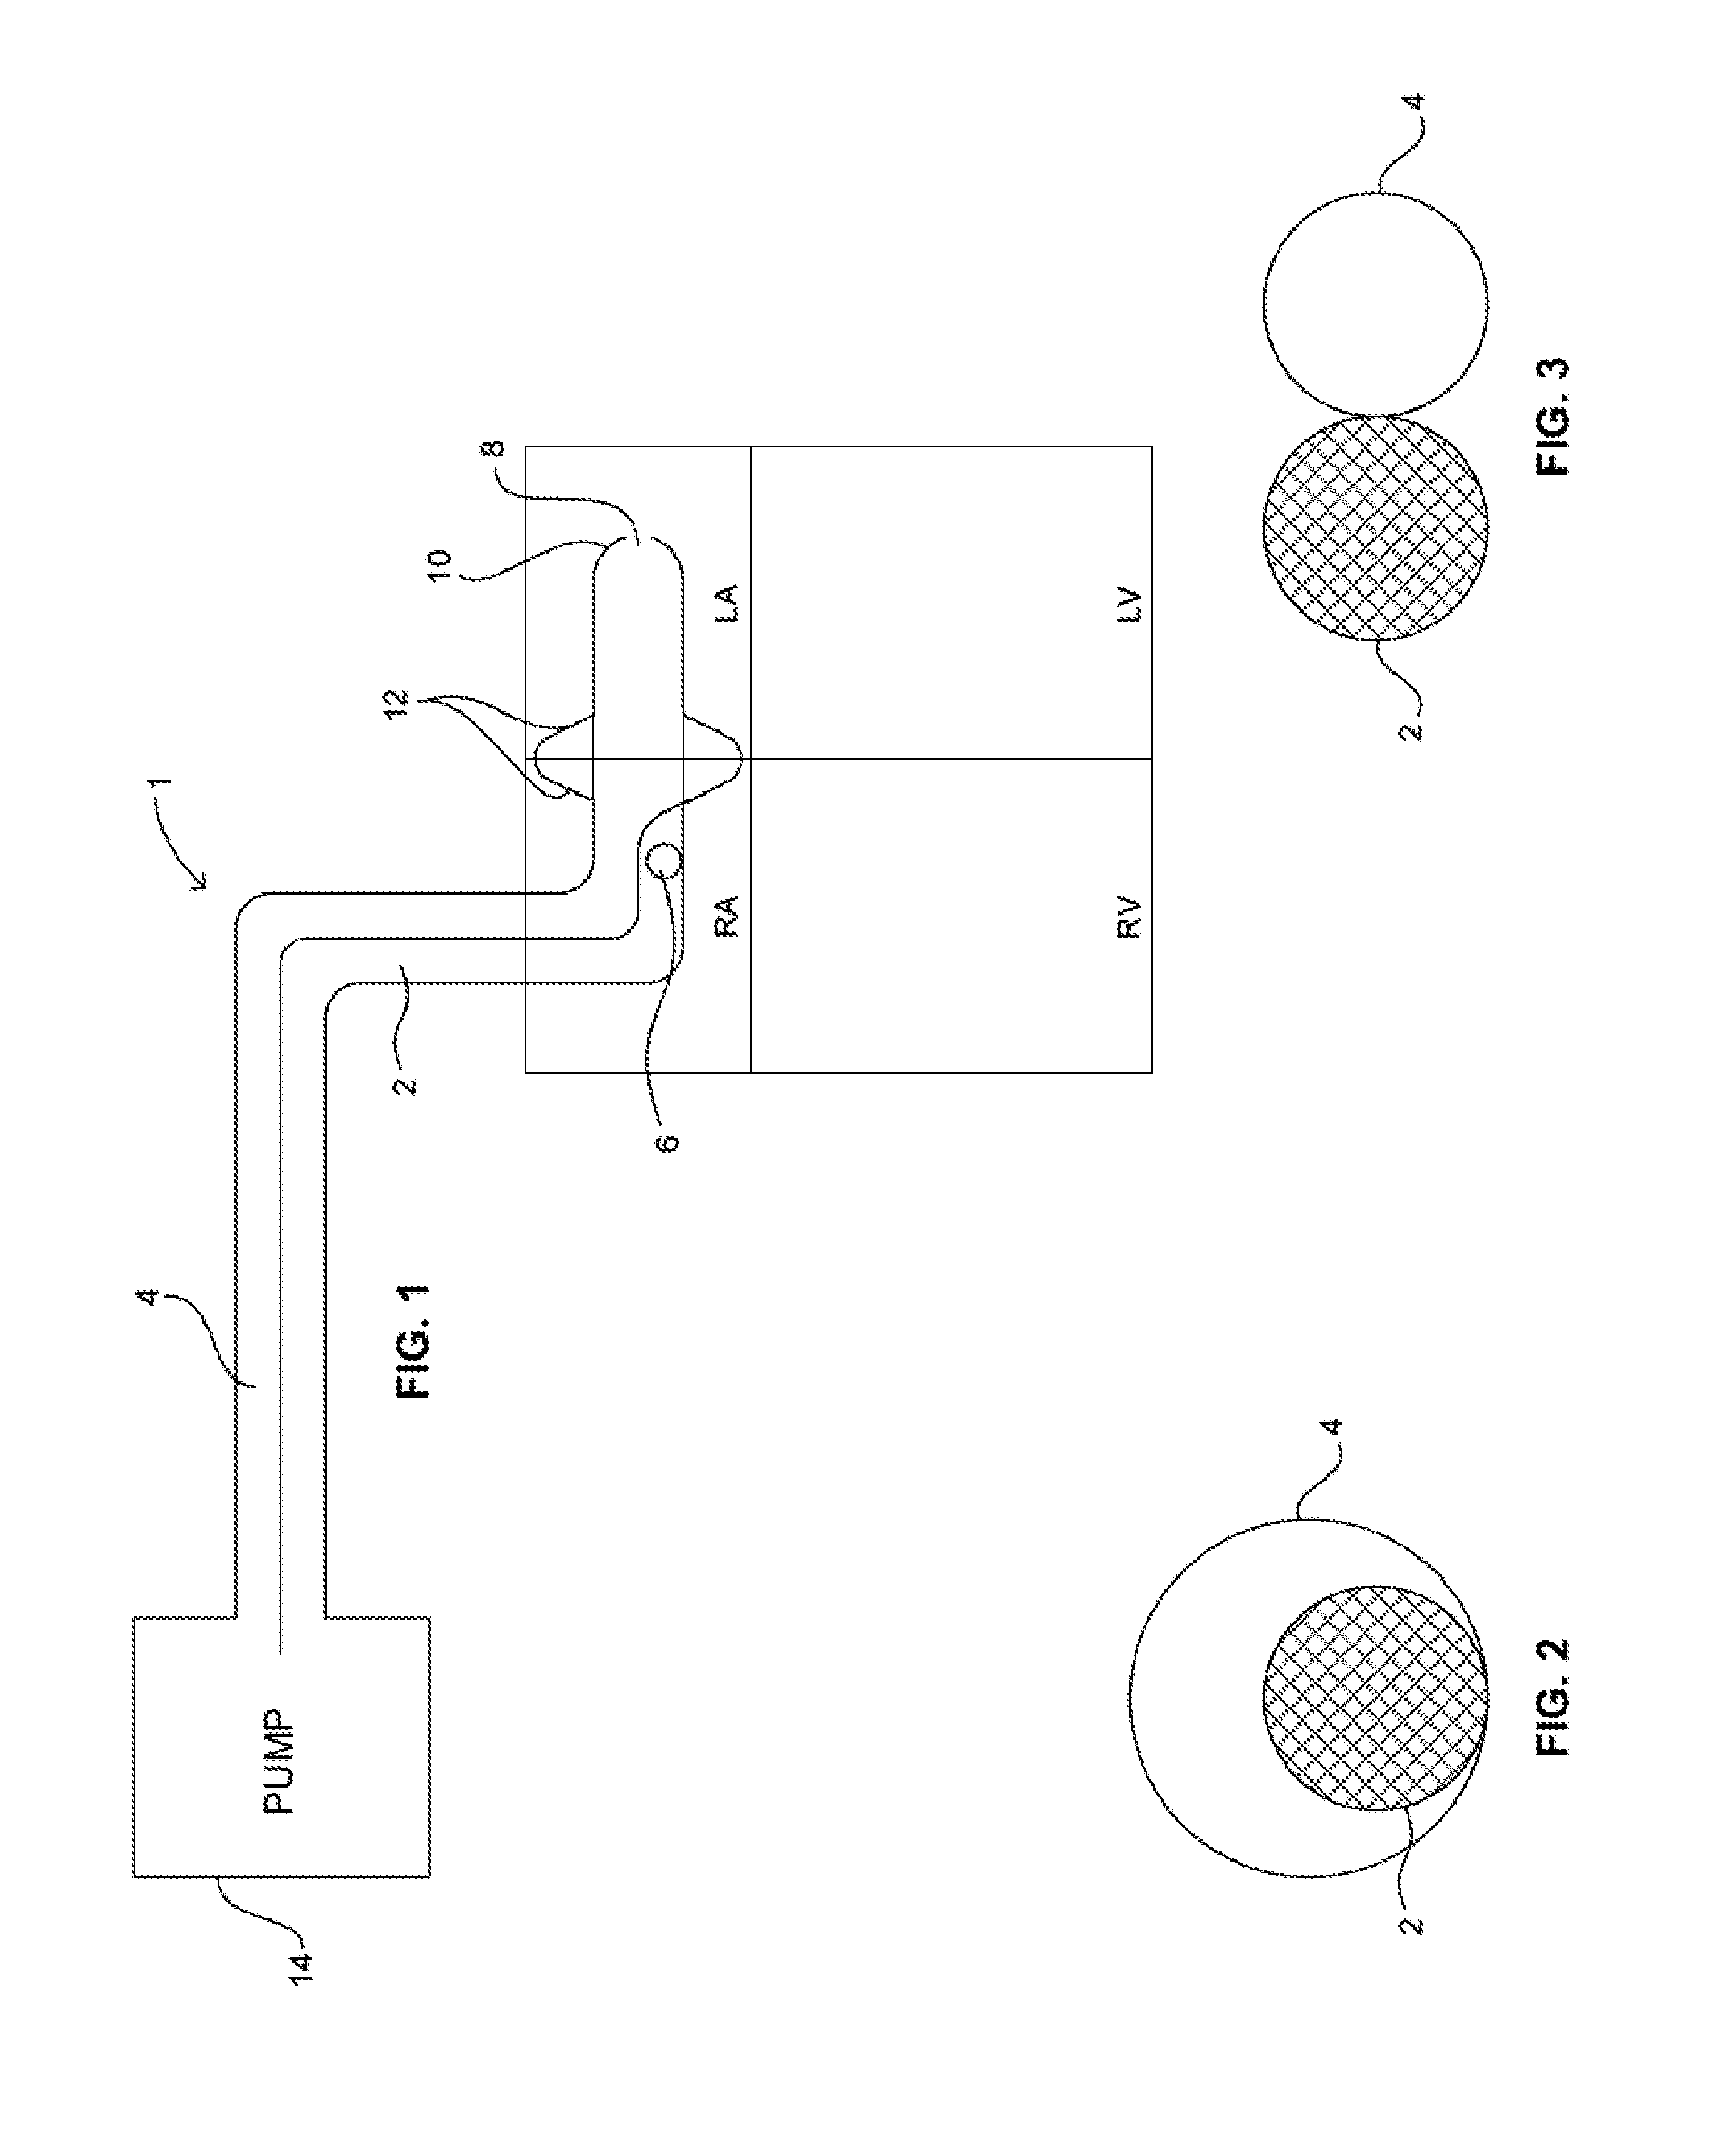 Cardiac support system and methods